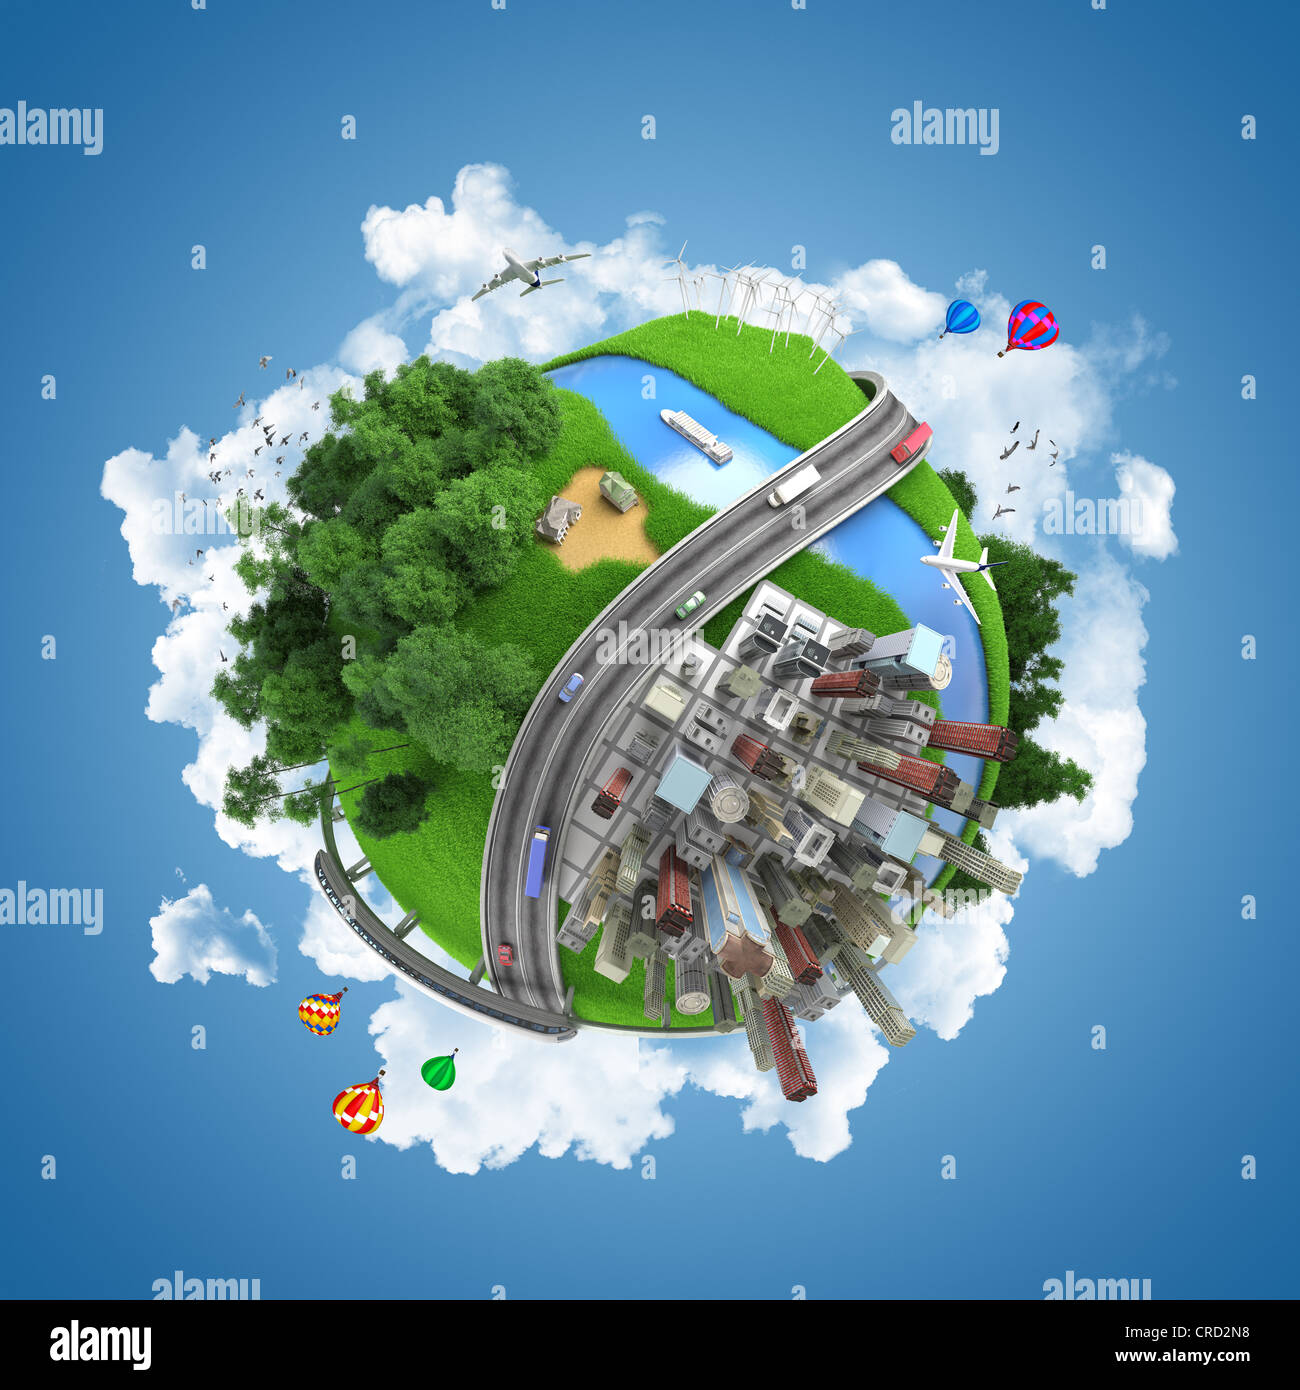 globe concept showing the various modes of transport and life styles in the world Stock Photo